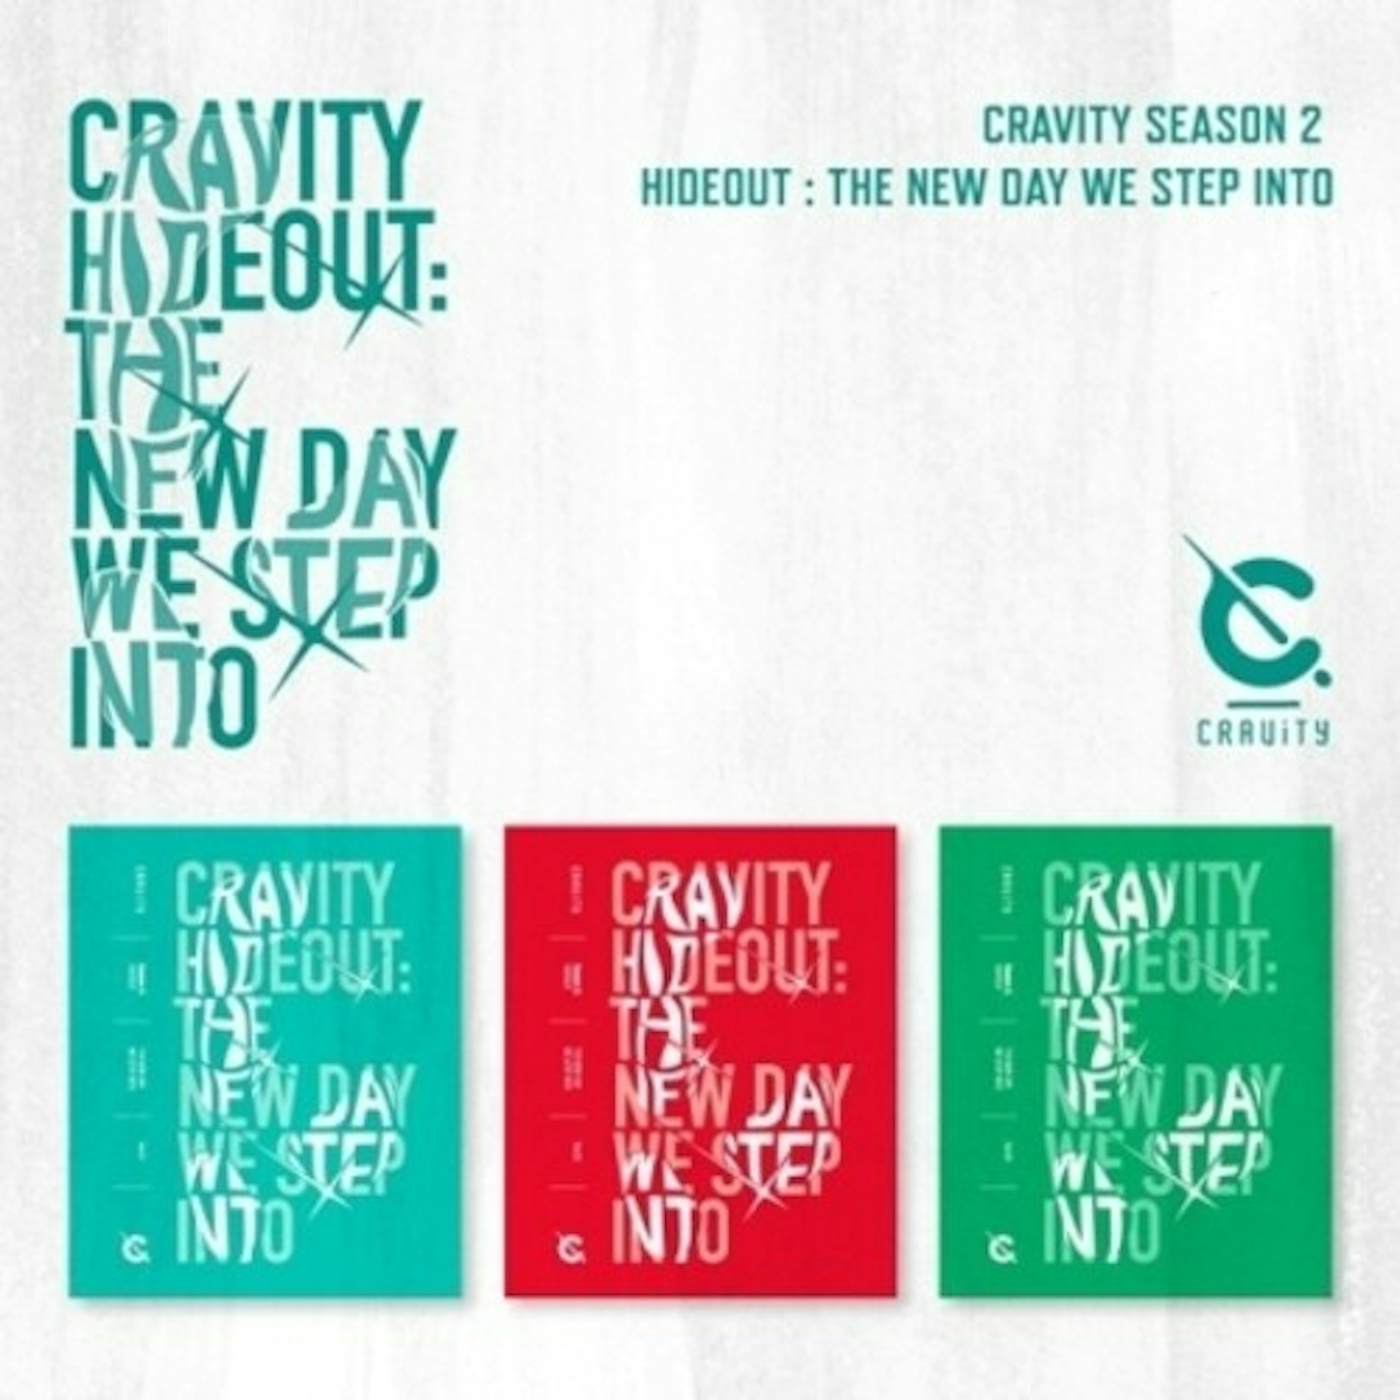 CRAVITY SEASON 2. HIDEOUT: NEW DAY WE STEP INTO CD